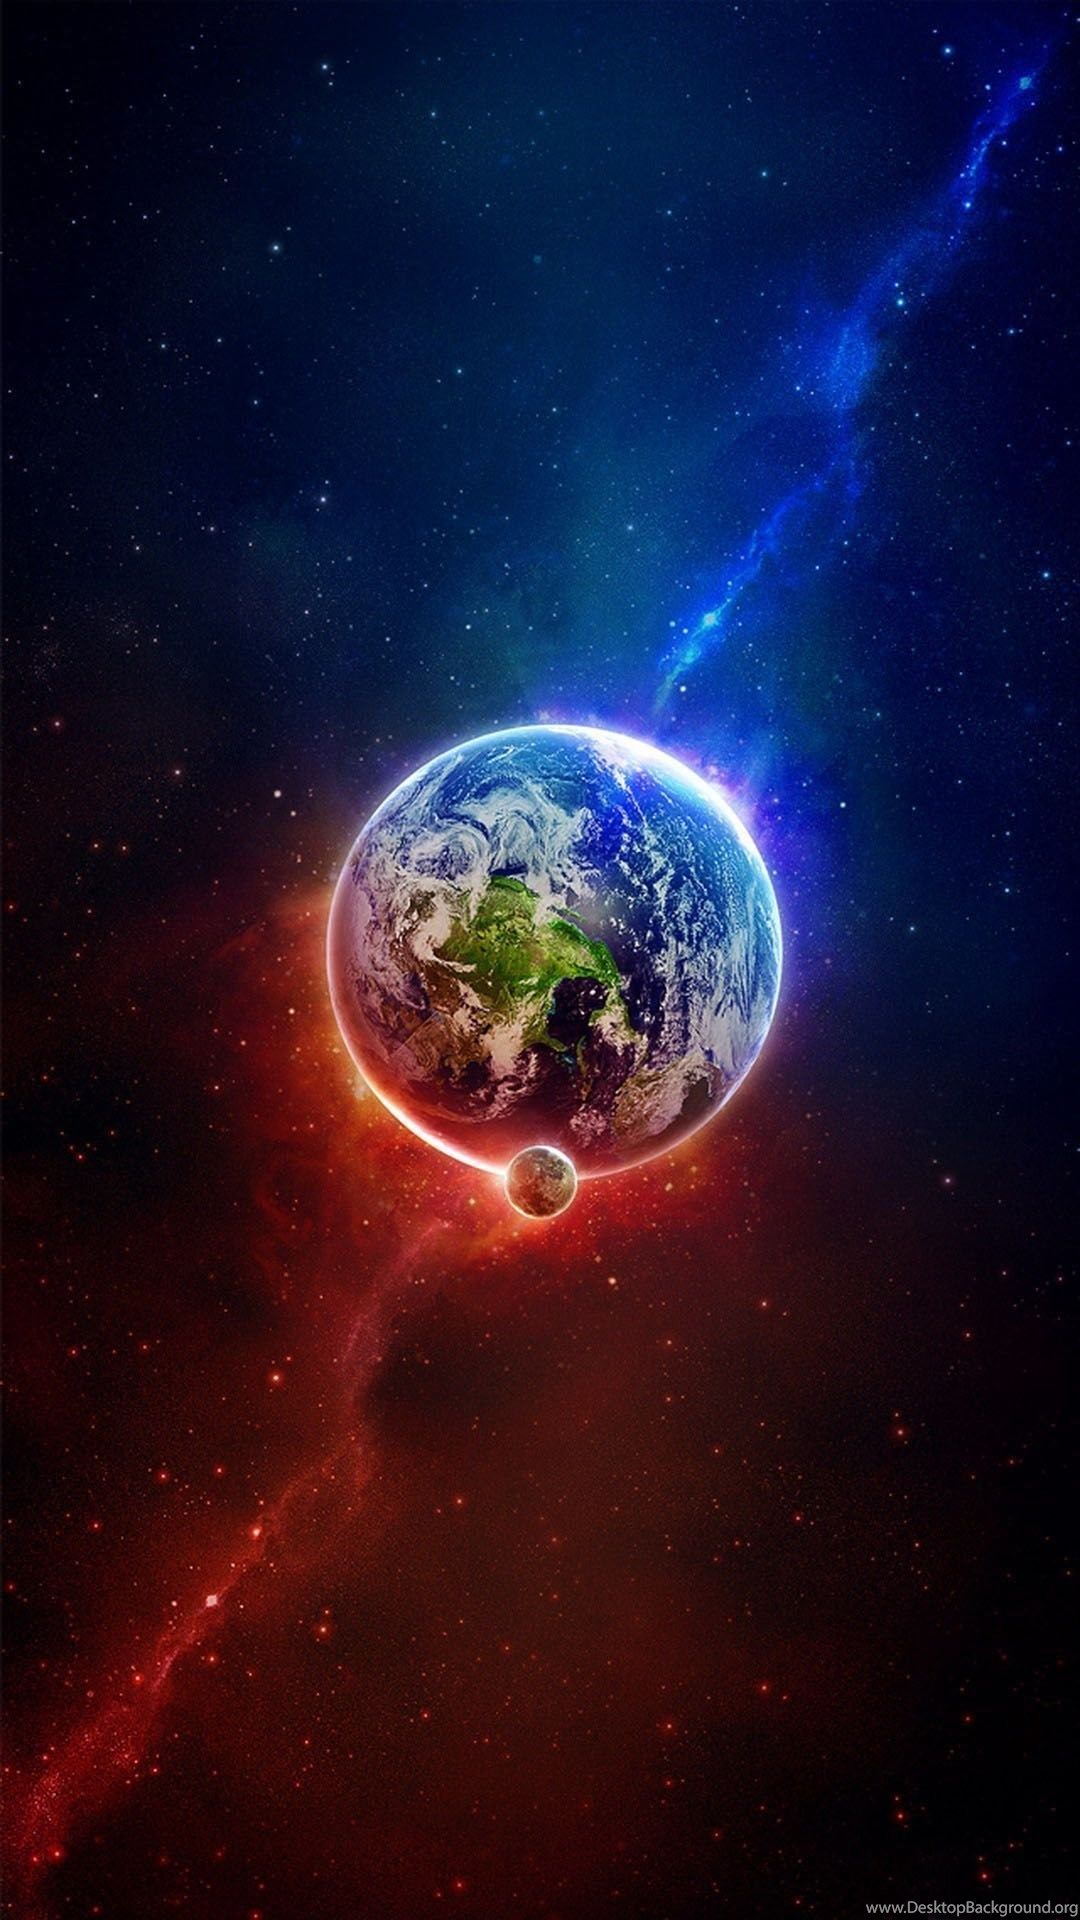 Oppo R7 Wallpaper: Space Earth Android Wallpaper Mobile Android. Desktop Background